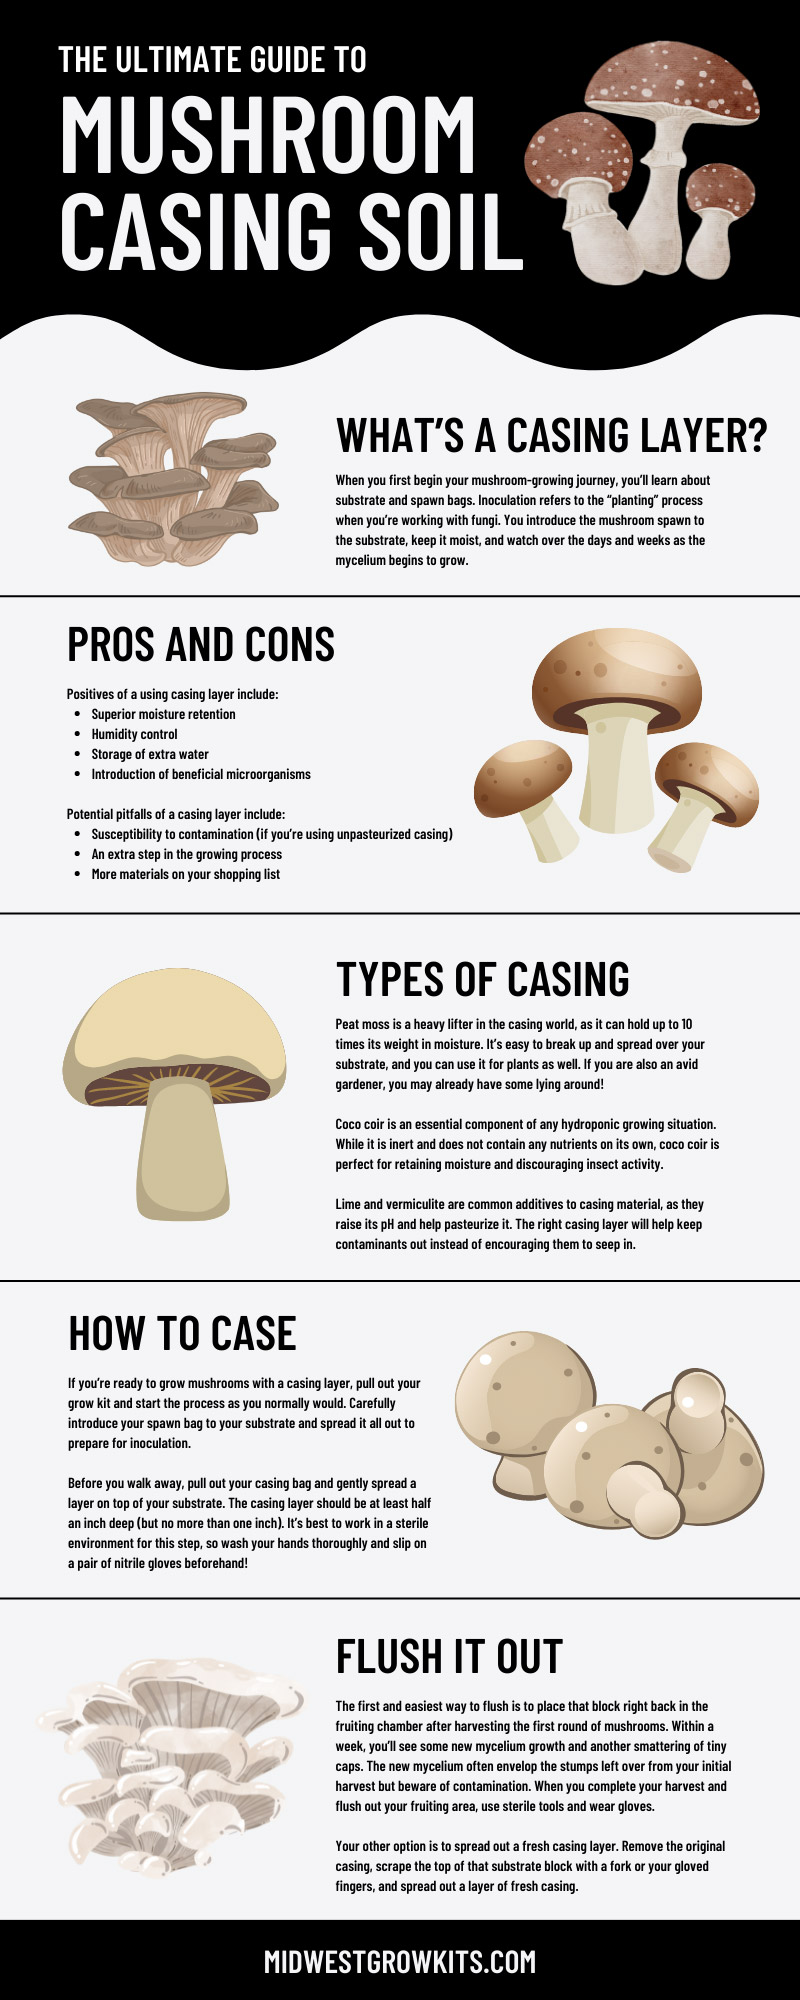 The Ultimate Guide to Mushroom Casing Soil